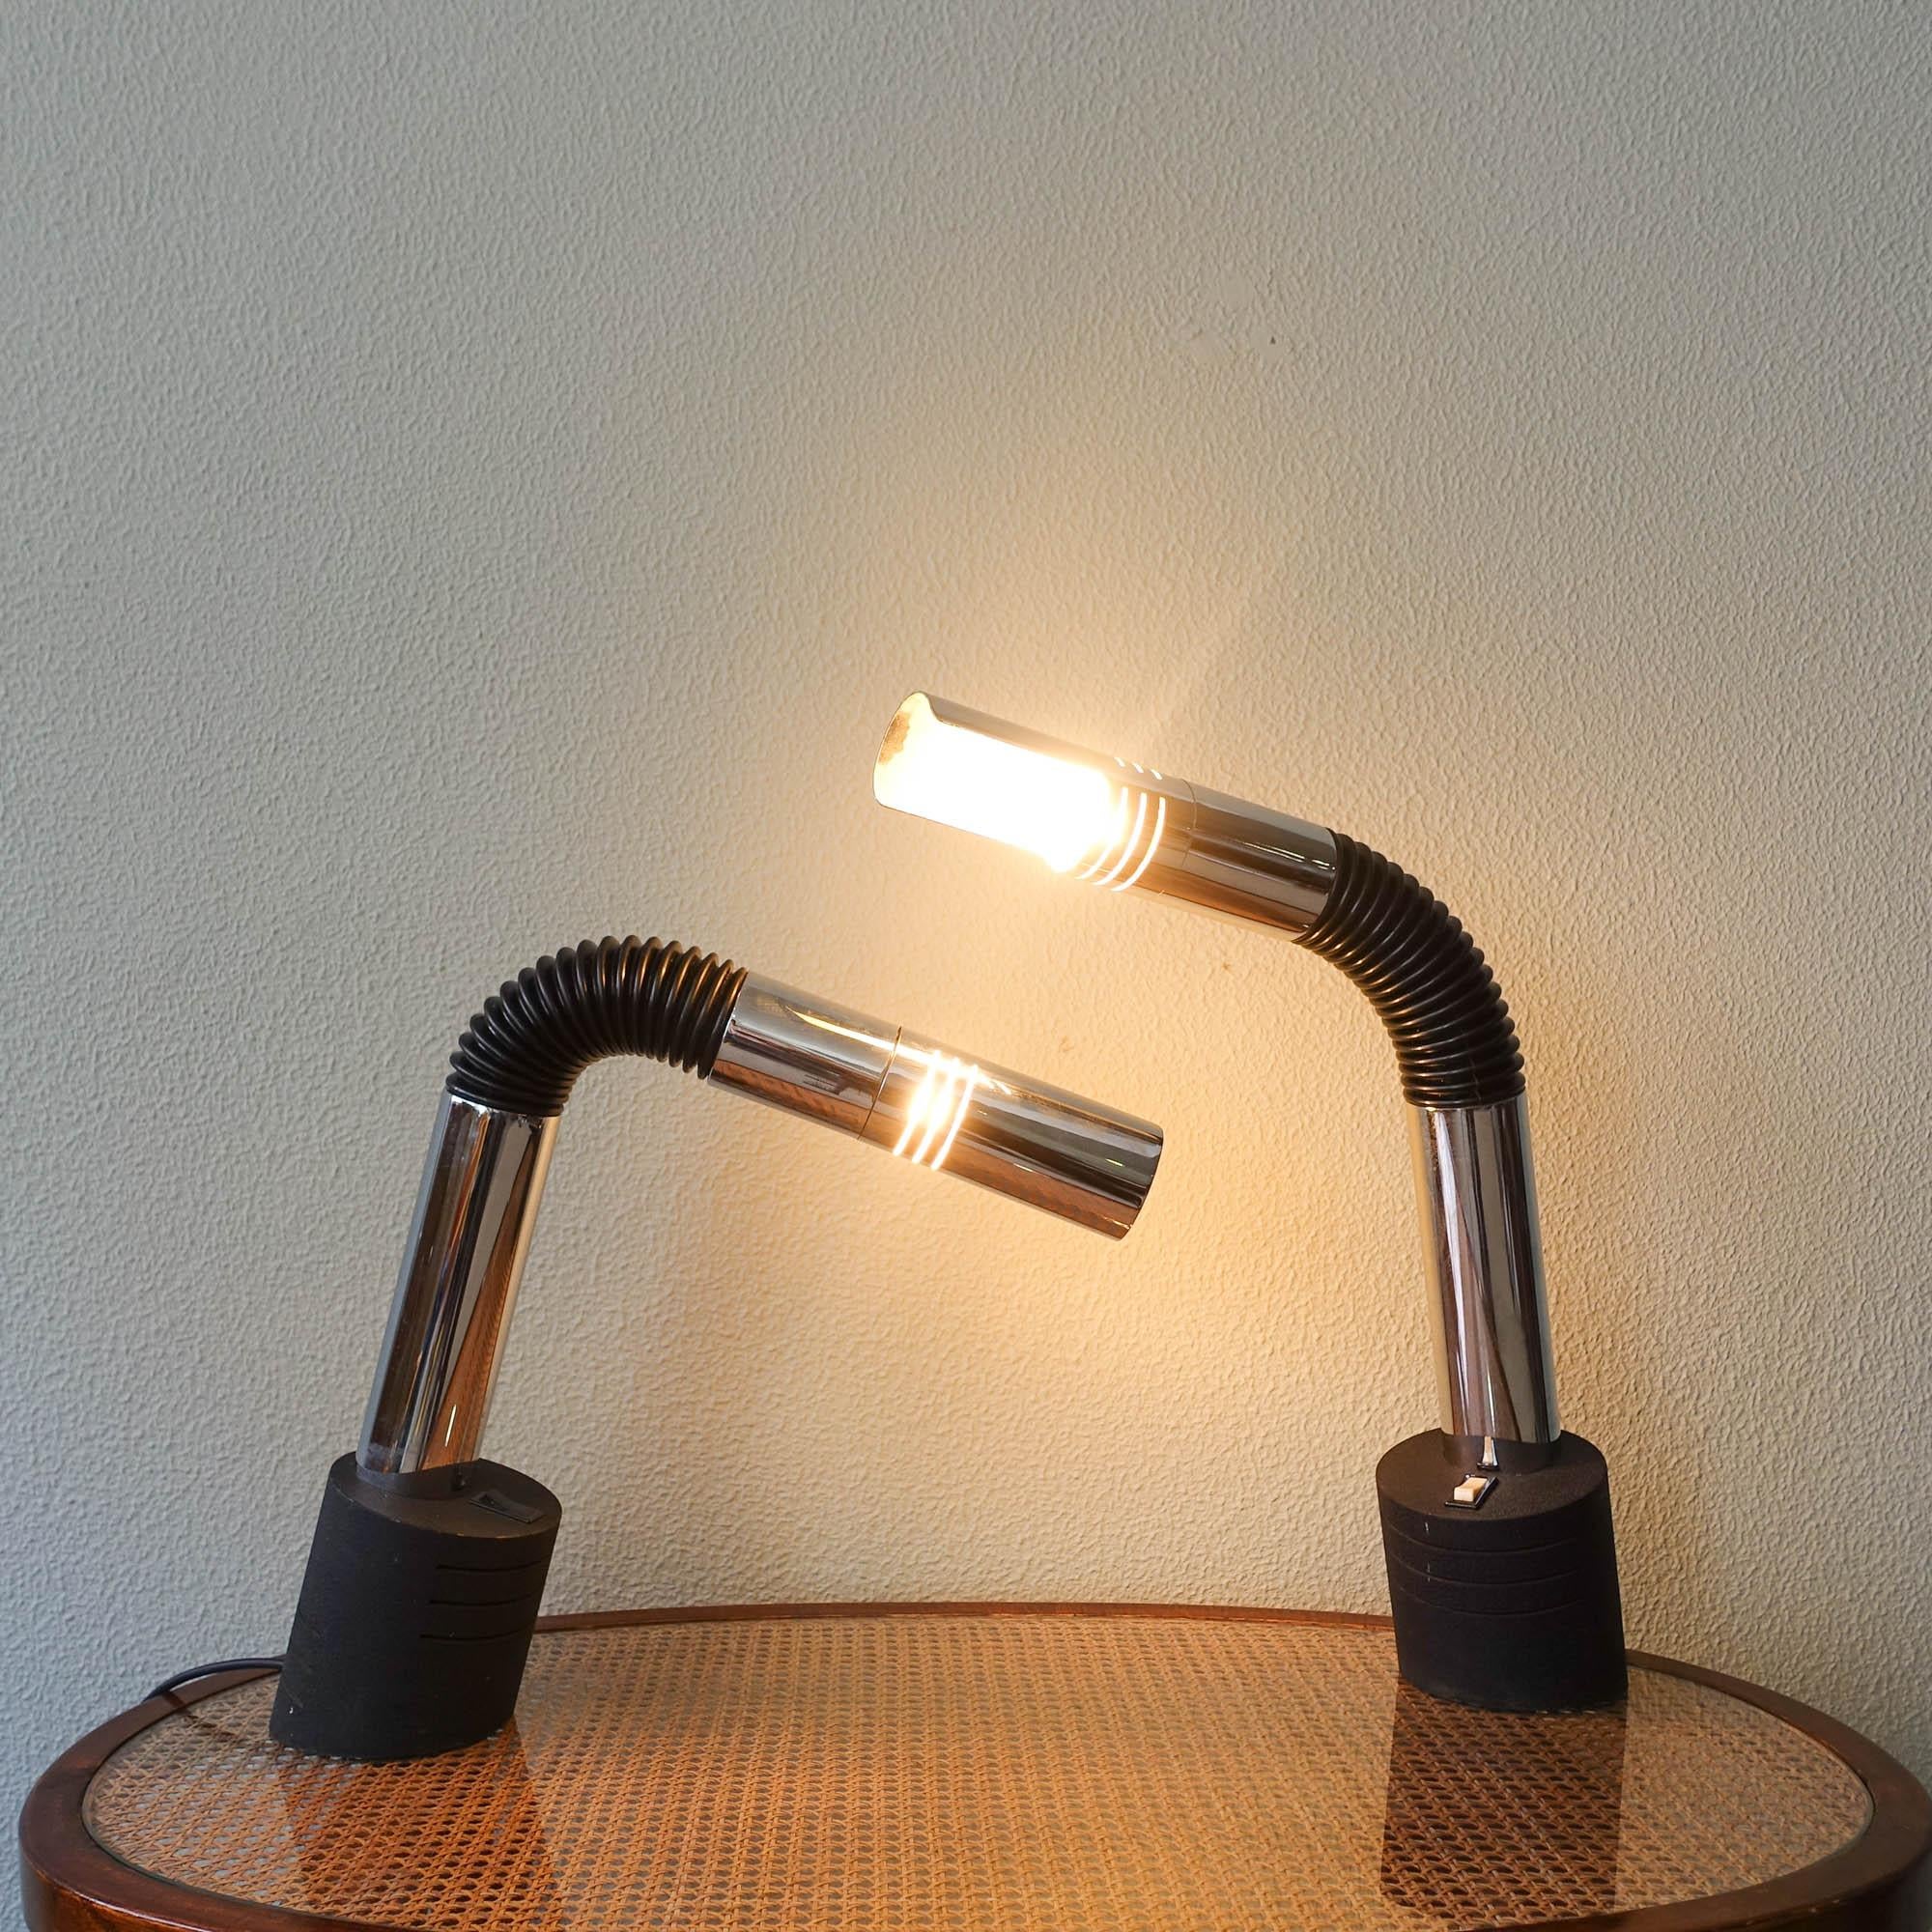 Late 20th Century Pair of “Elbow” Table Lamp by E. Bellini for Targetti Sankey, 1970s For Sale